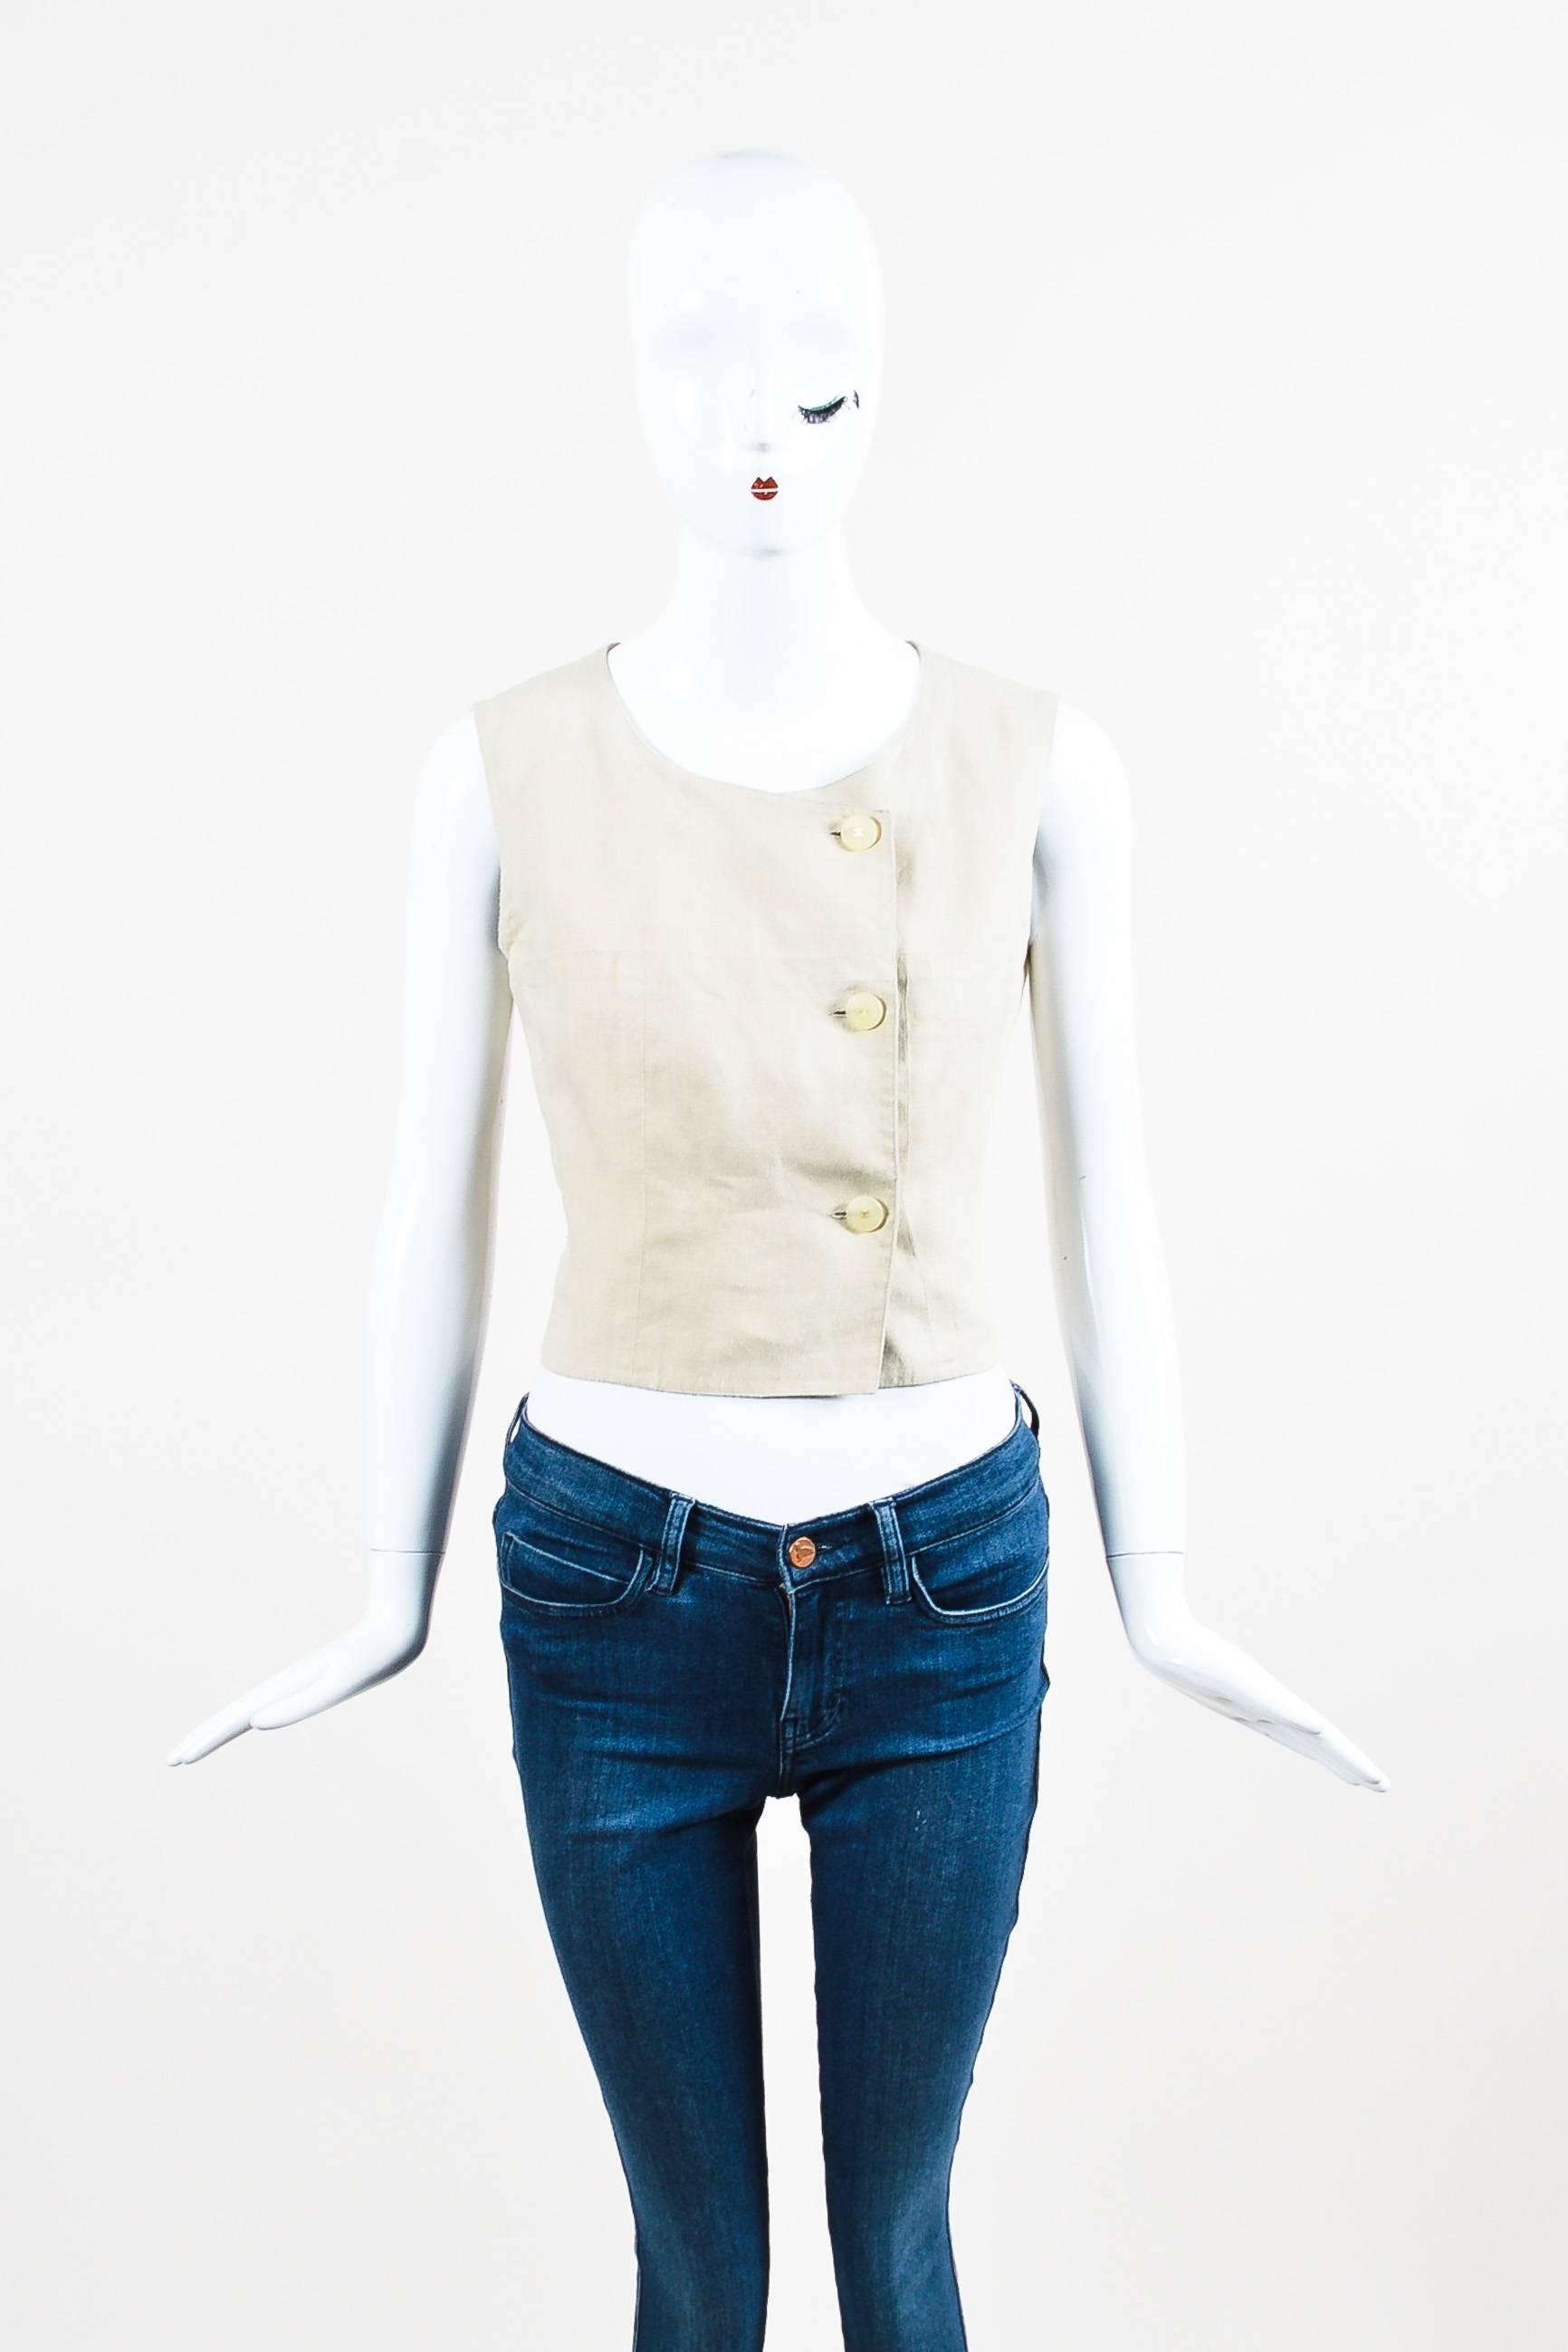 Minimalist vest featuring an asymmetrical front with 'CC' translucent buttons and a scoop neck. Unlined.

Size	
40 (FR)
8 (US) 	 	

Additional measurement: Shoulder -to- Shoulder 13.75